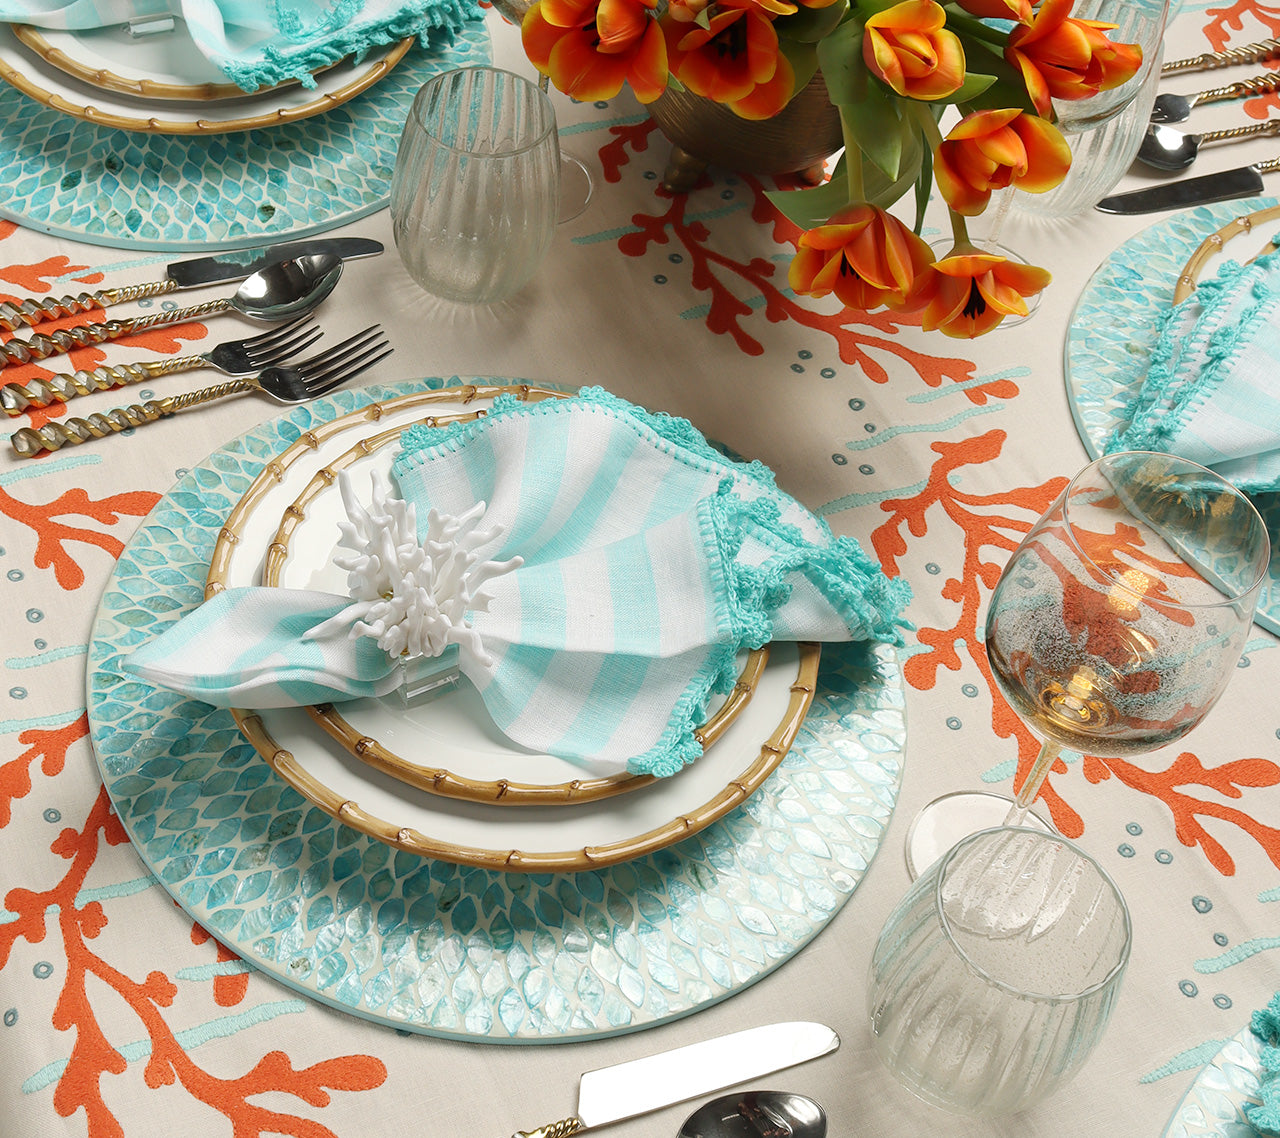 Seafoam Marquis Placemat on a table with a cream tablecloth with an orange coral motif